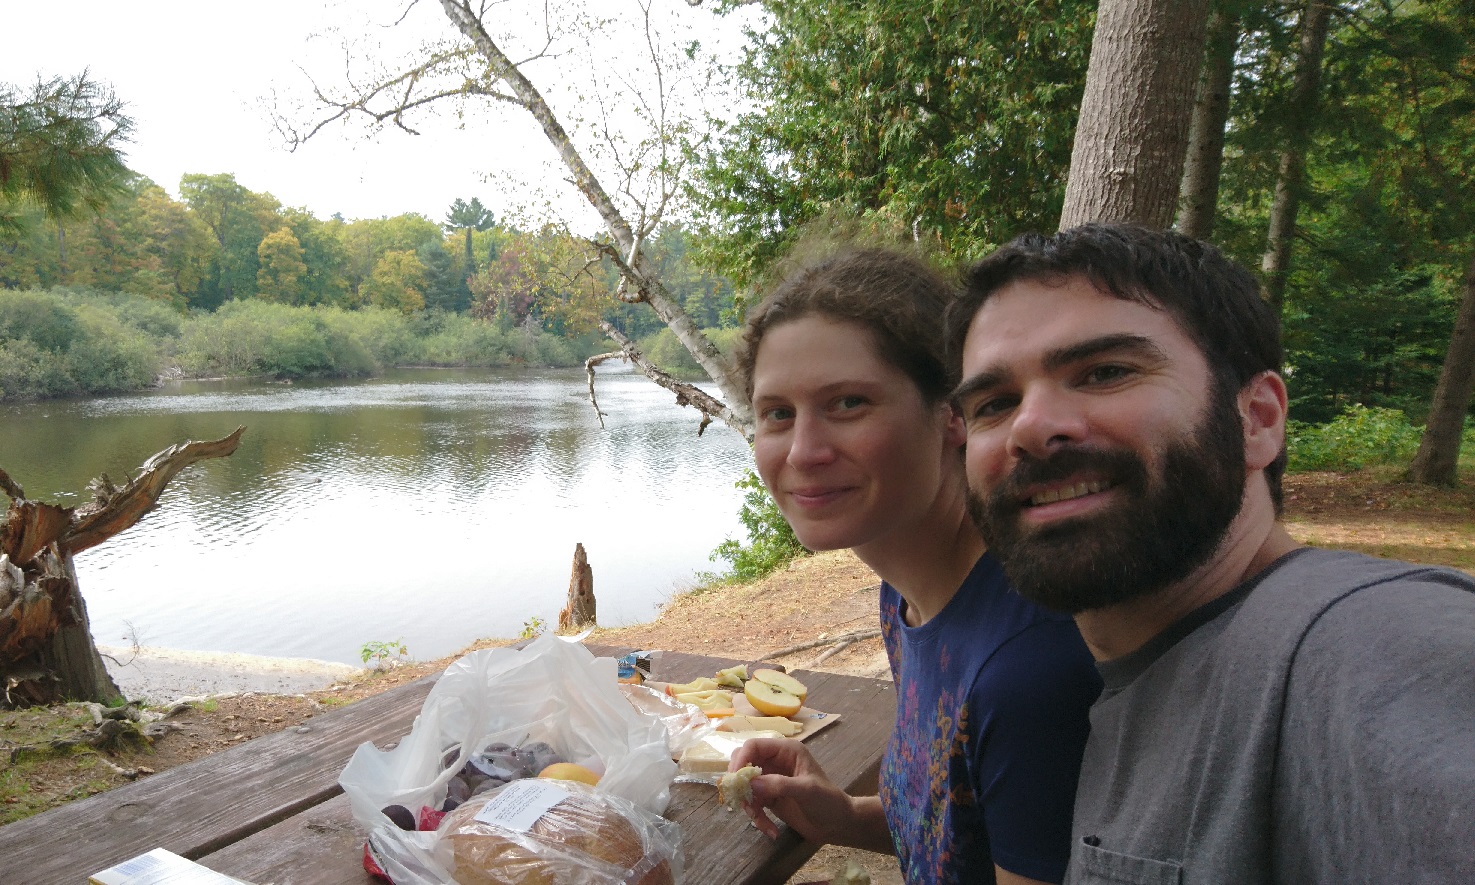 Picture of my wife and I having a picnice of bread and butter, apples and cheese on the bank of the Tahquamenon River.